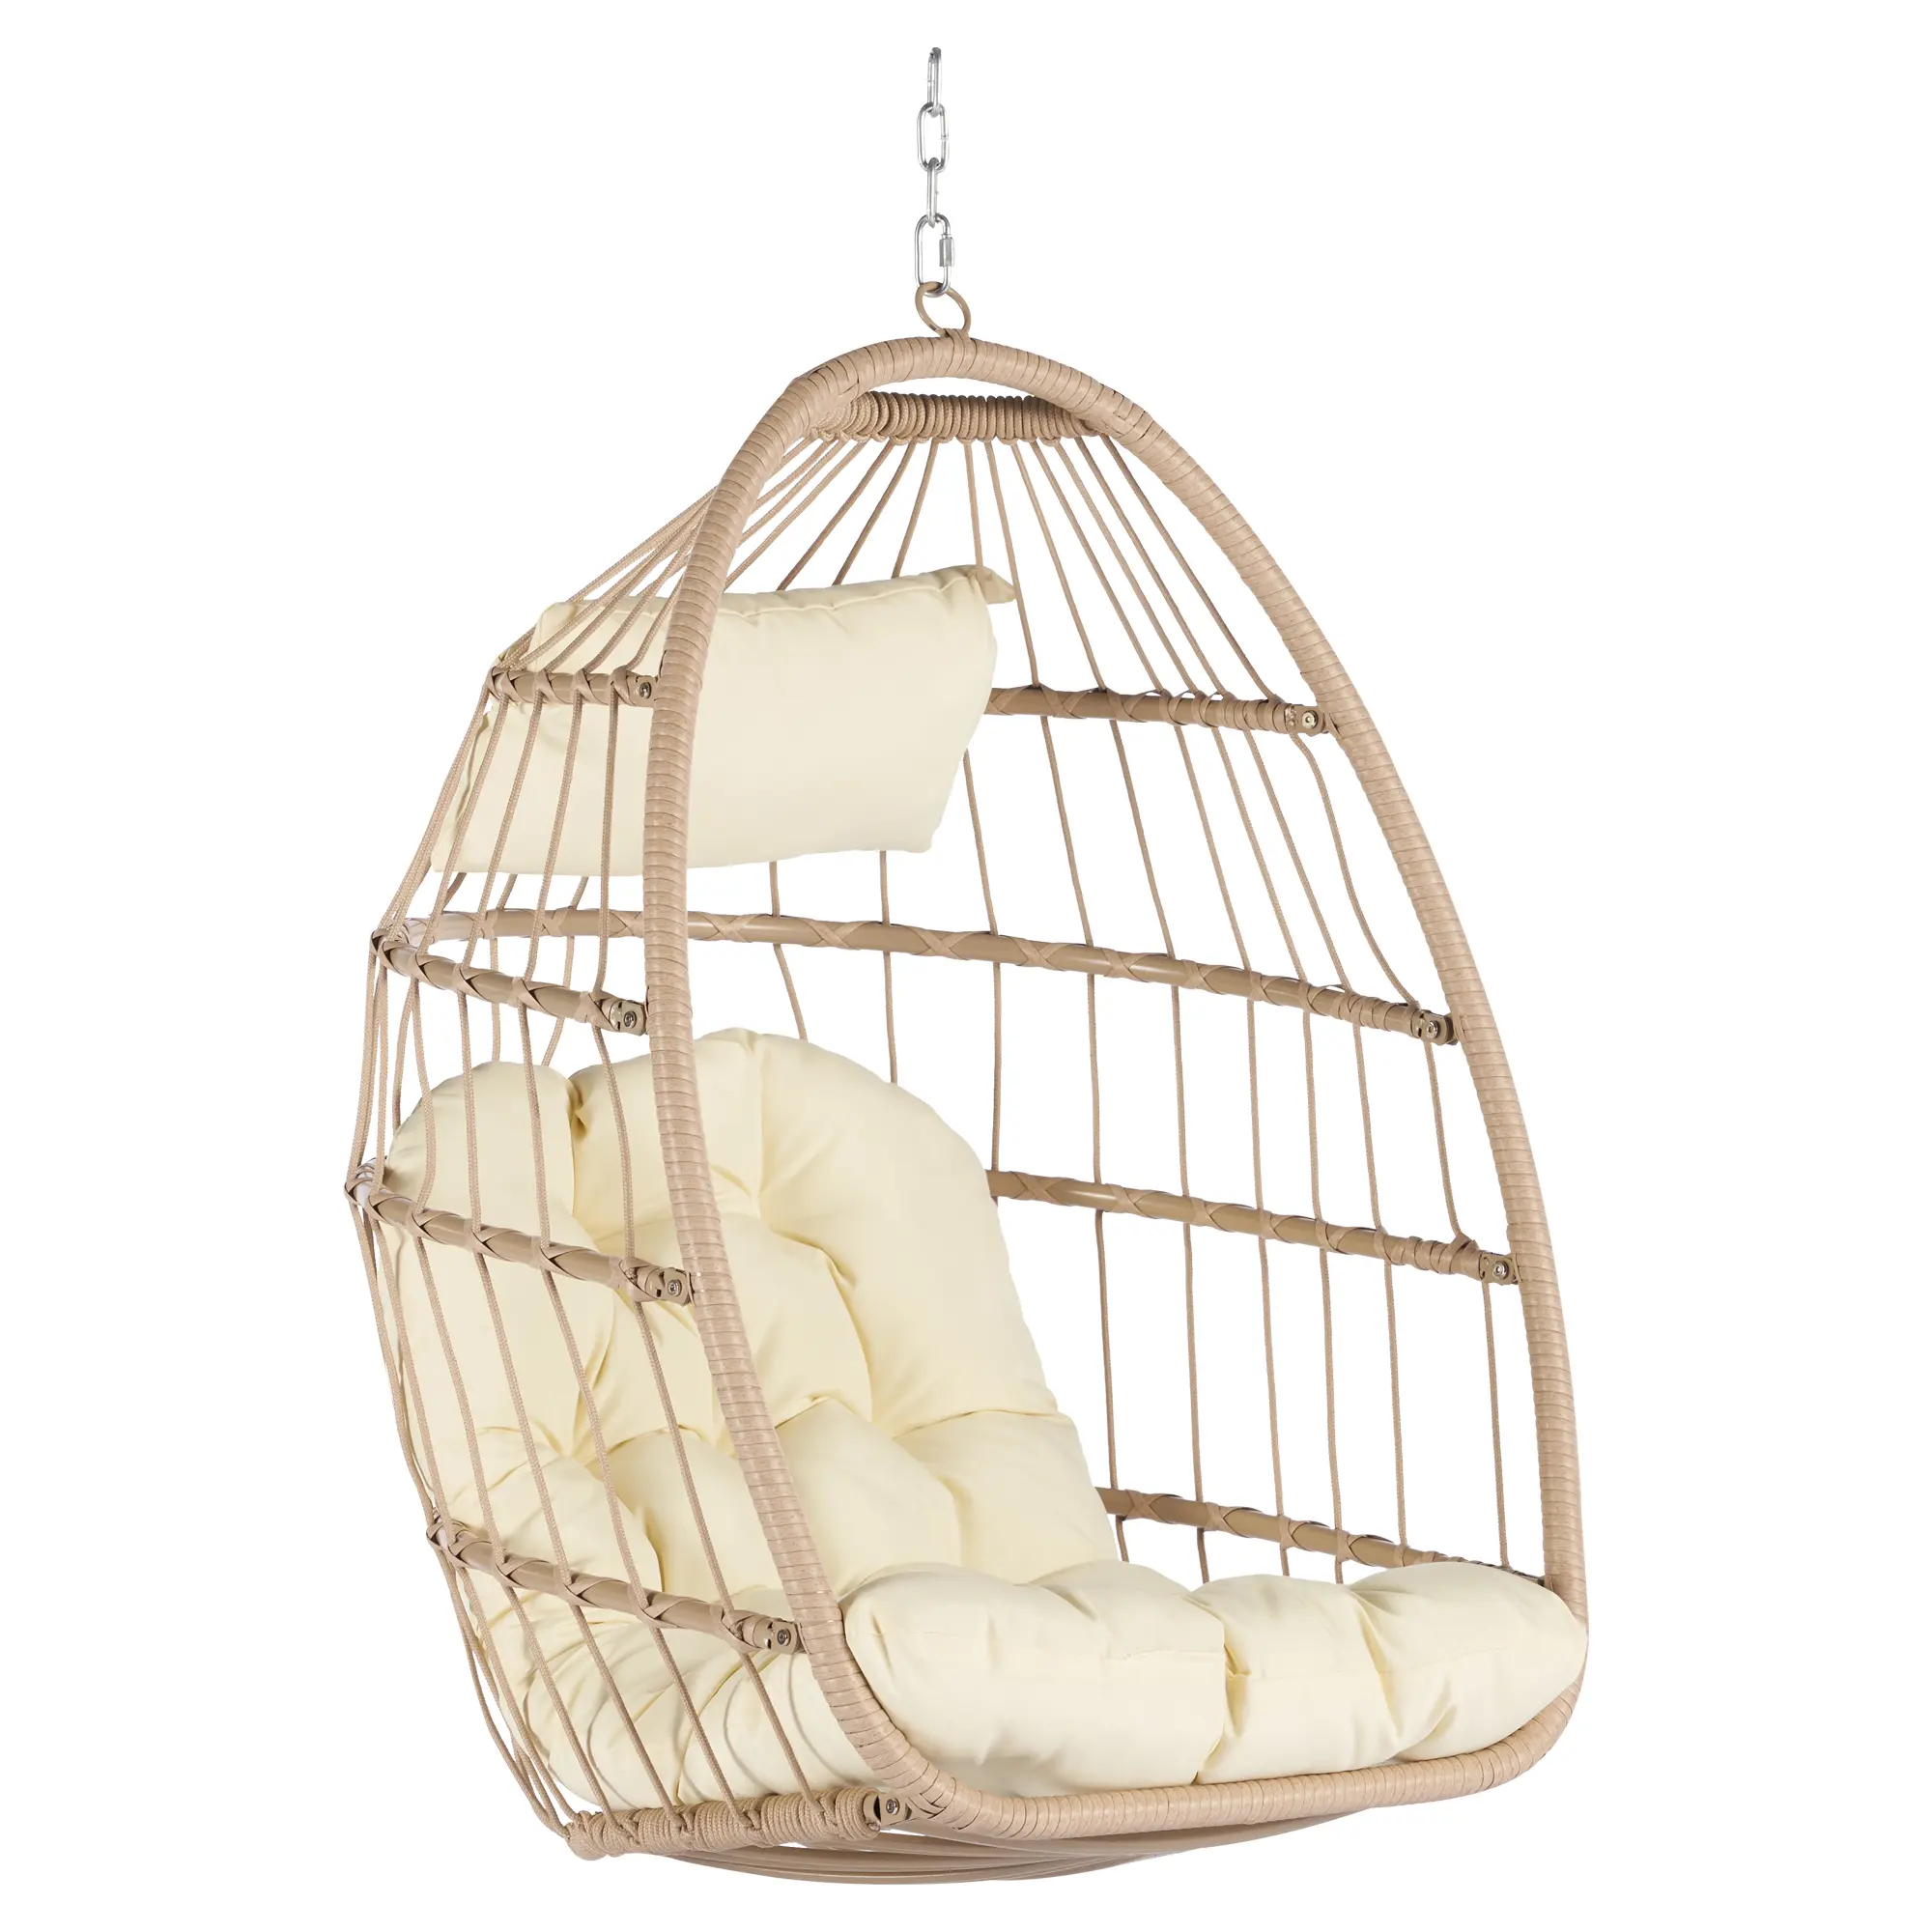 1-Person Wicker Swing Beige Hanging Egg Chair Patio Chair 